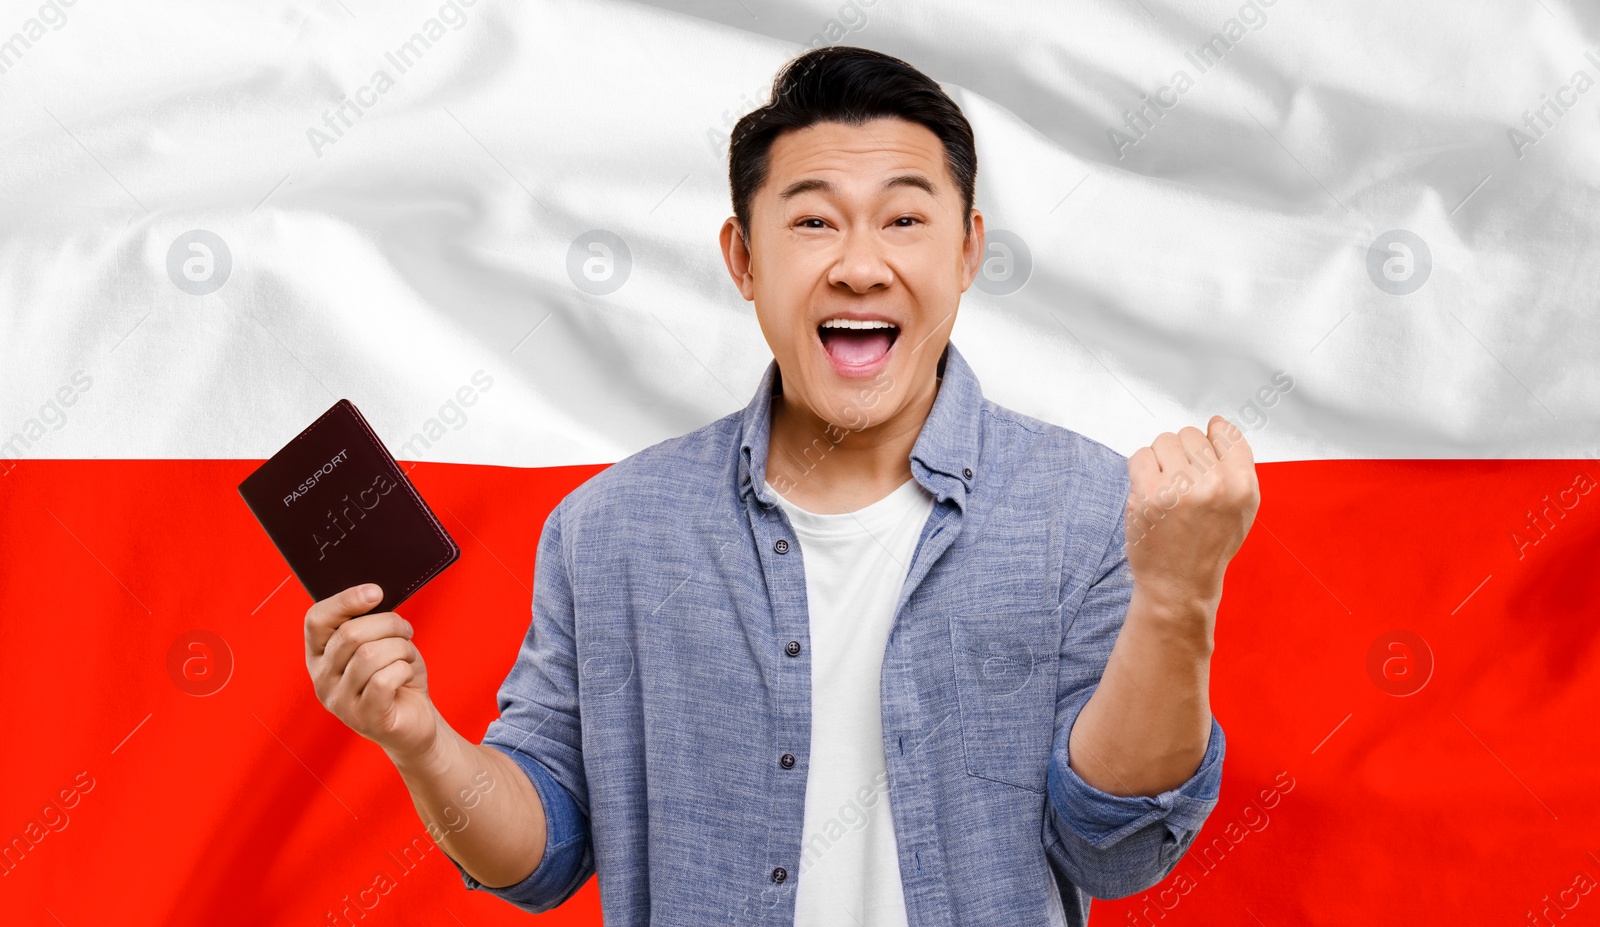 Image of Immigration. Happy man with passport against national flagPoland, banner design